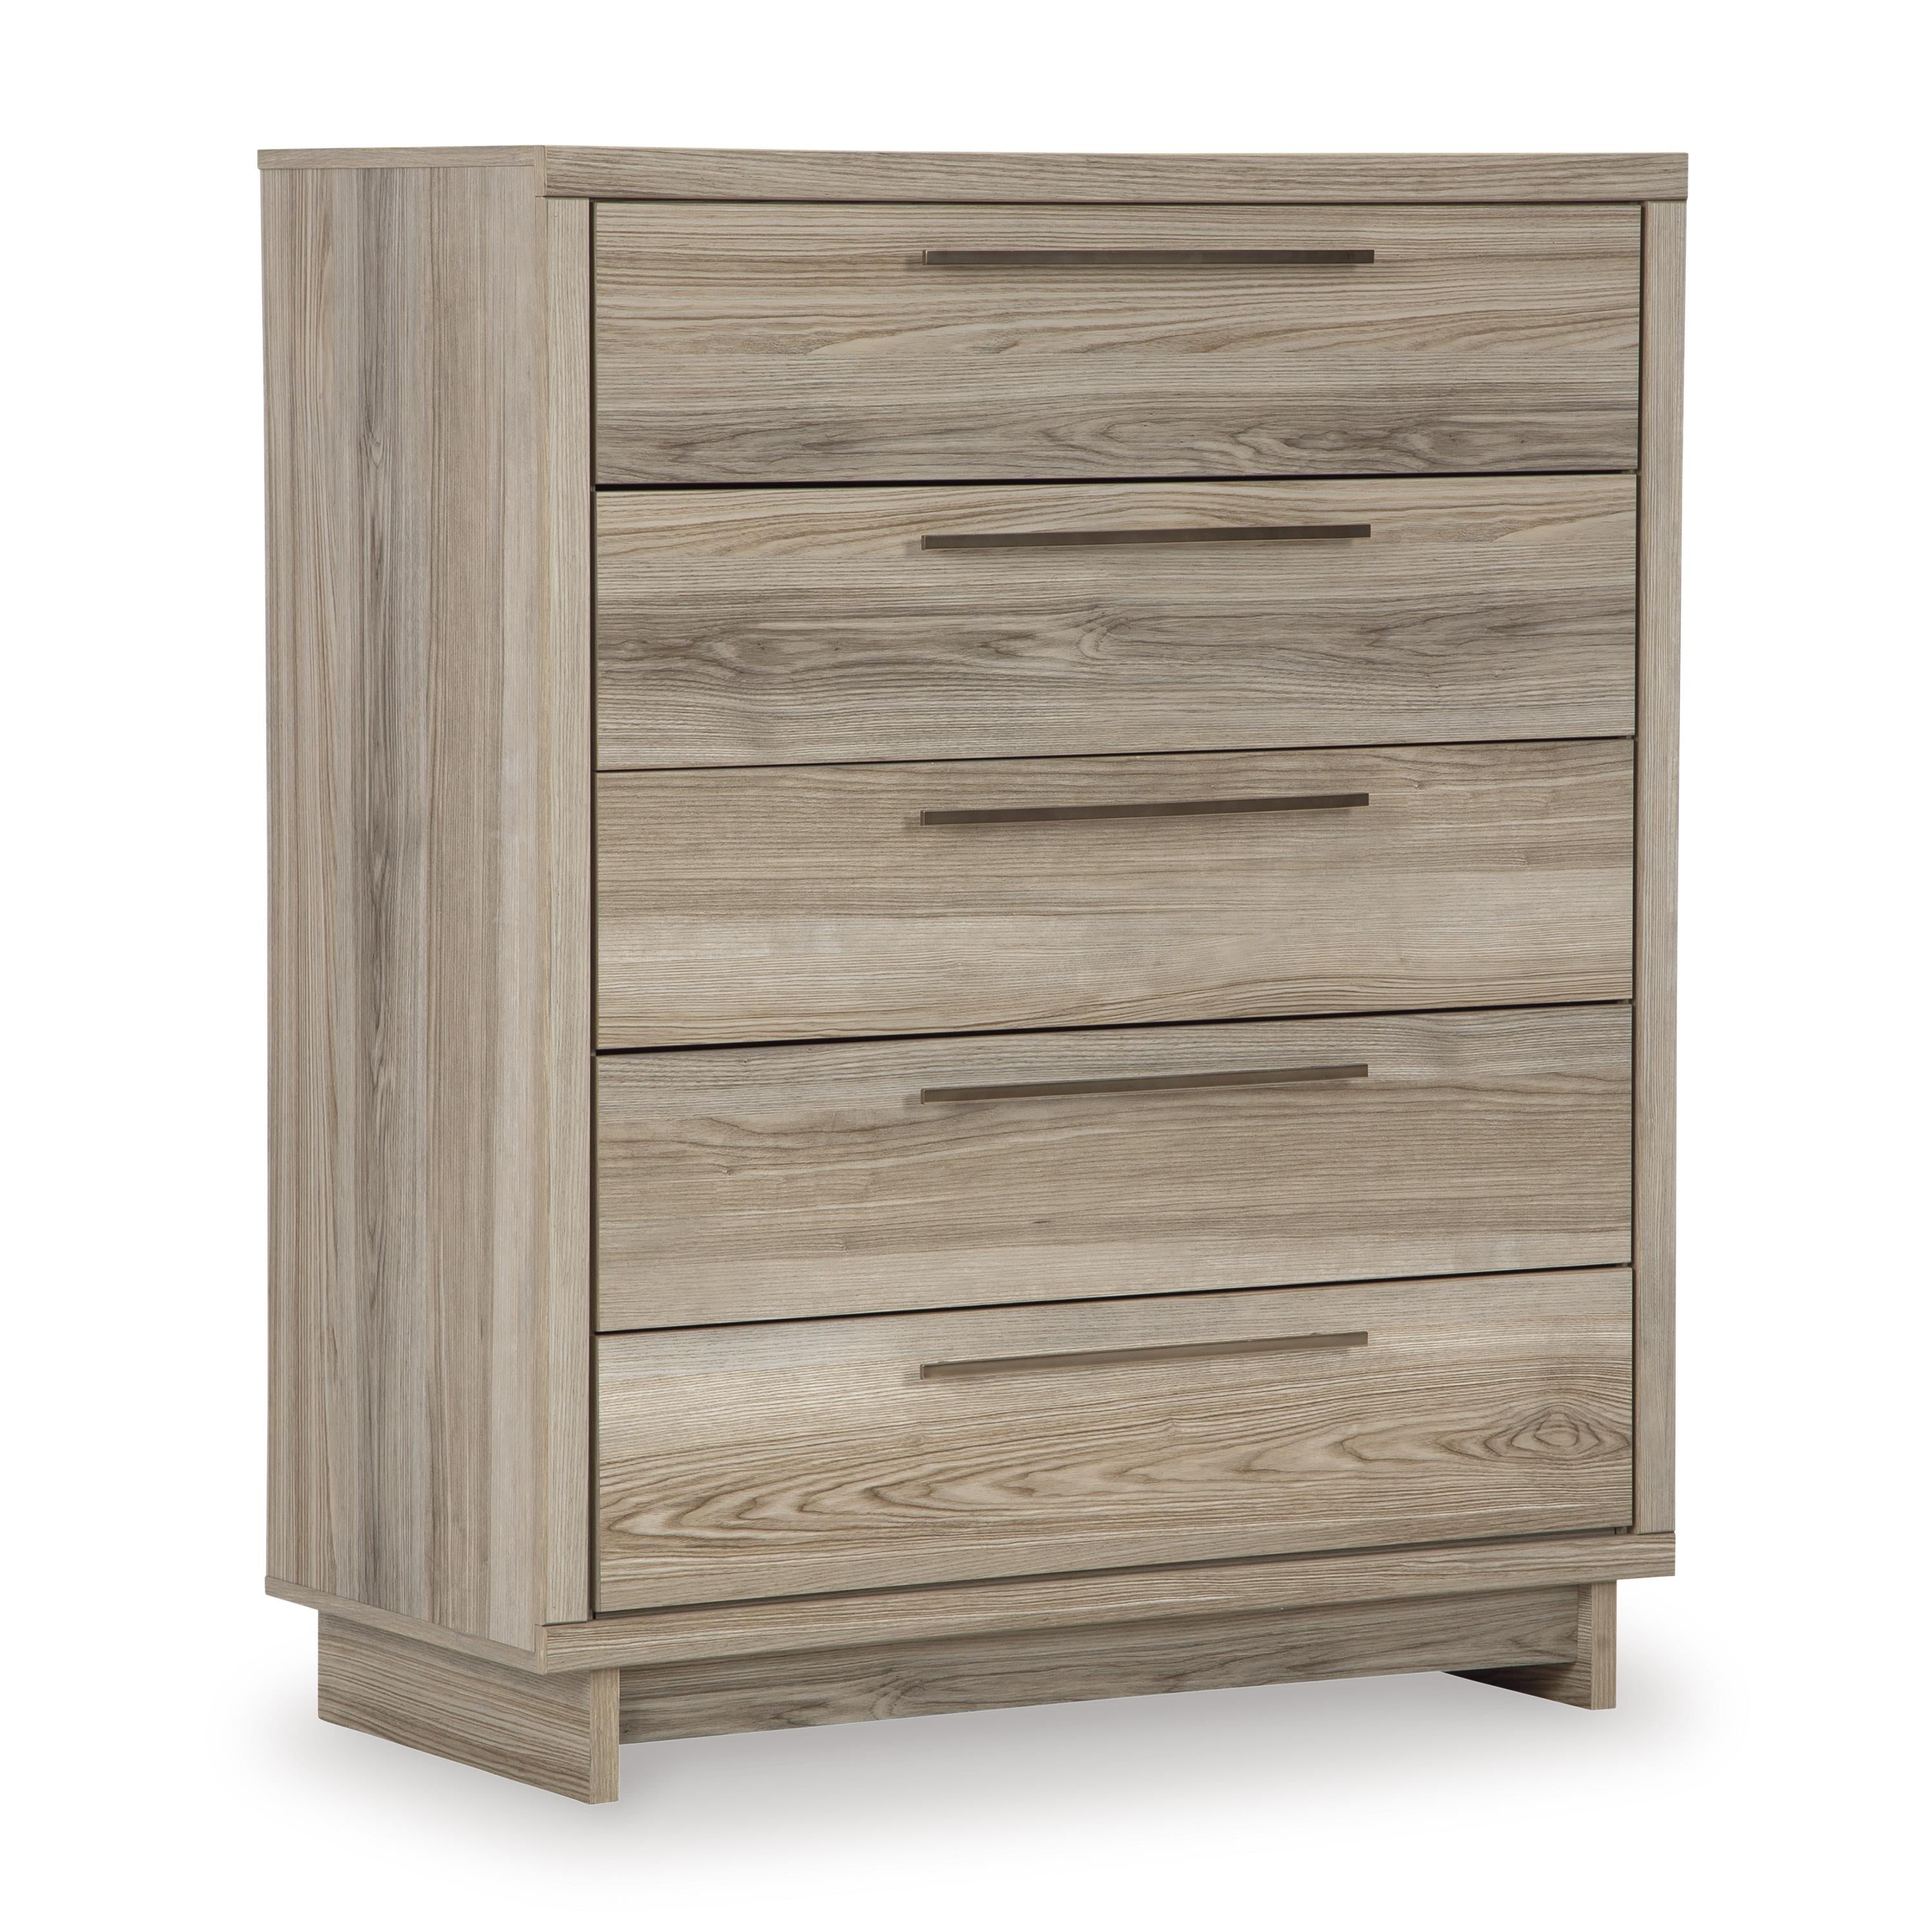 Robbinsdale Five Drawer Chest Available Online & In Store at